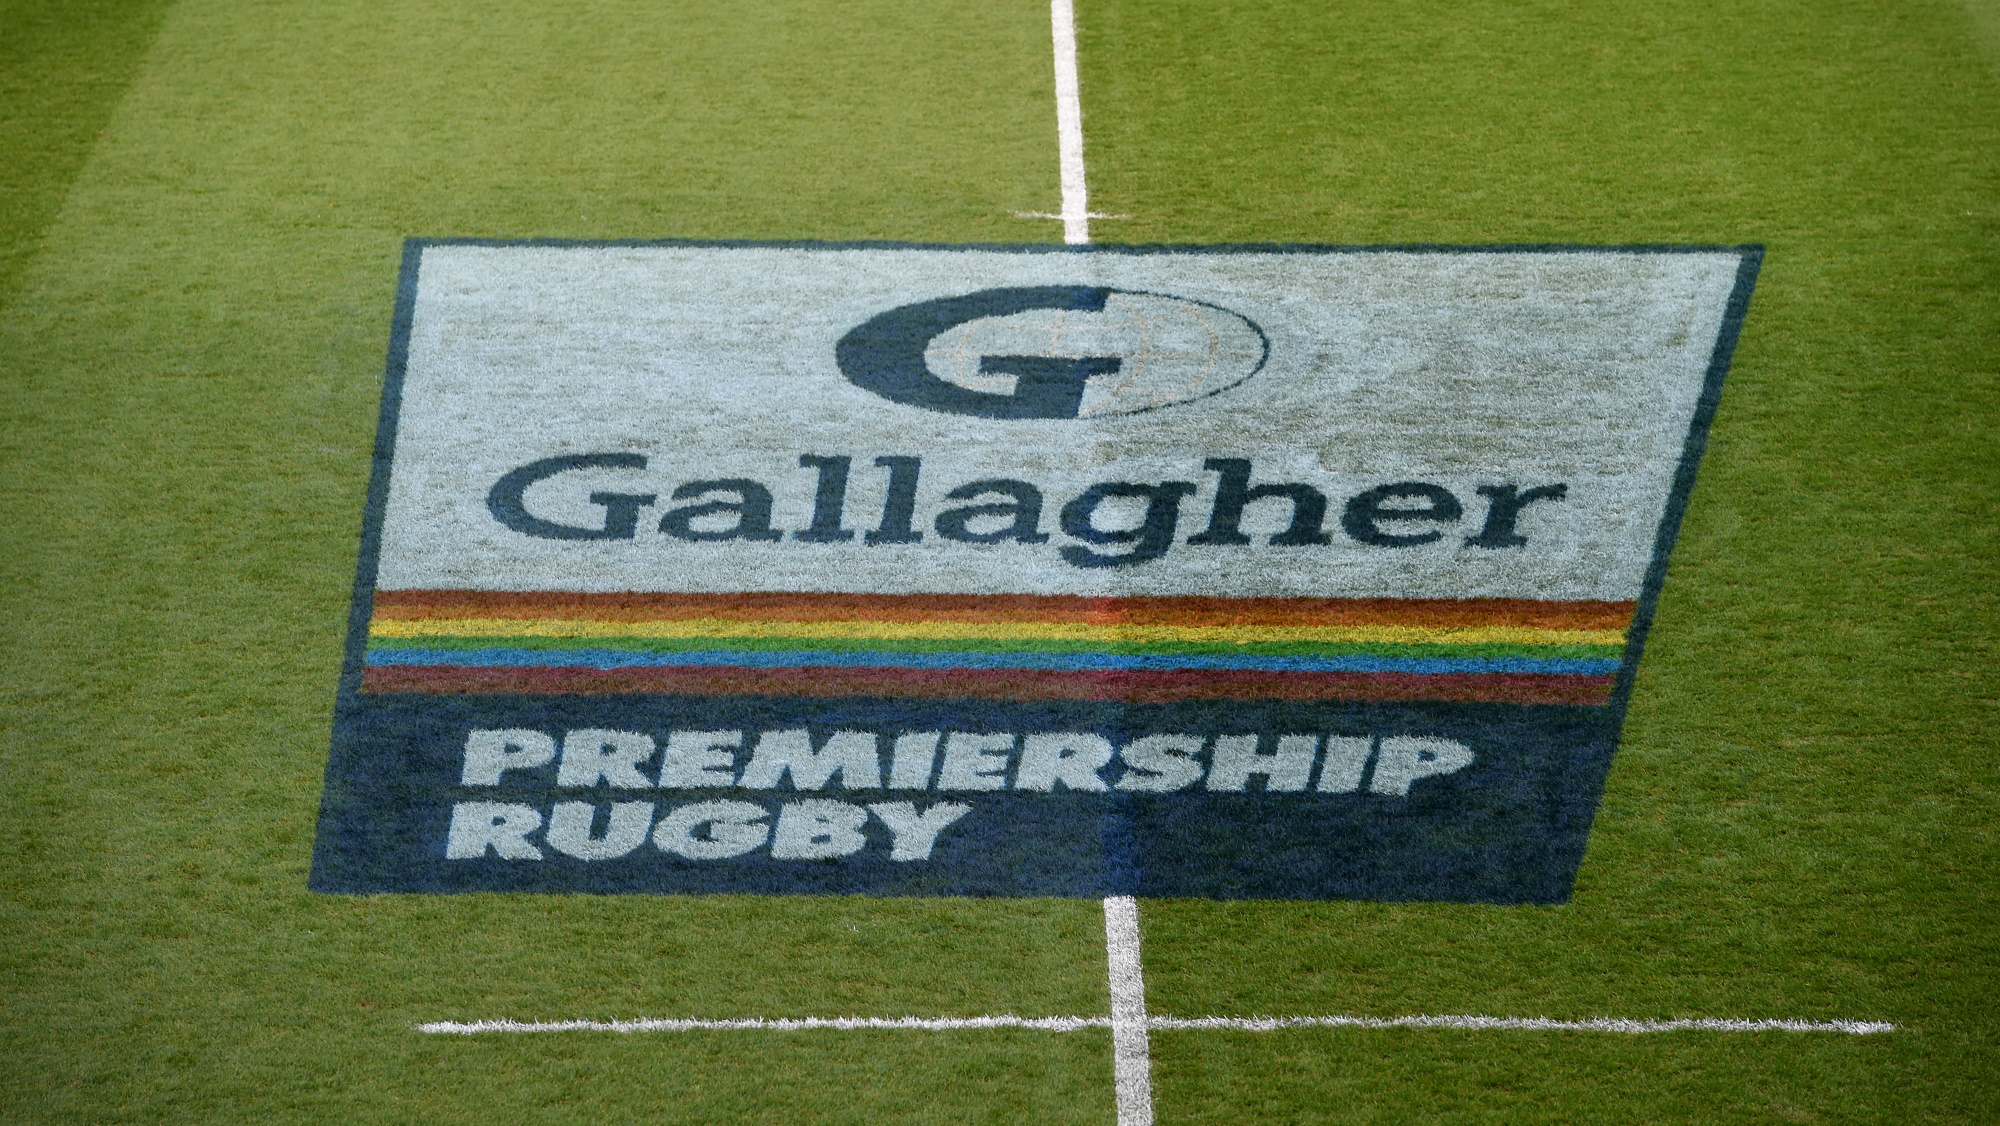 premiership rugby streaming live